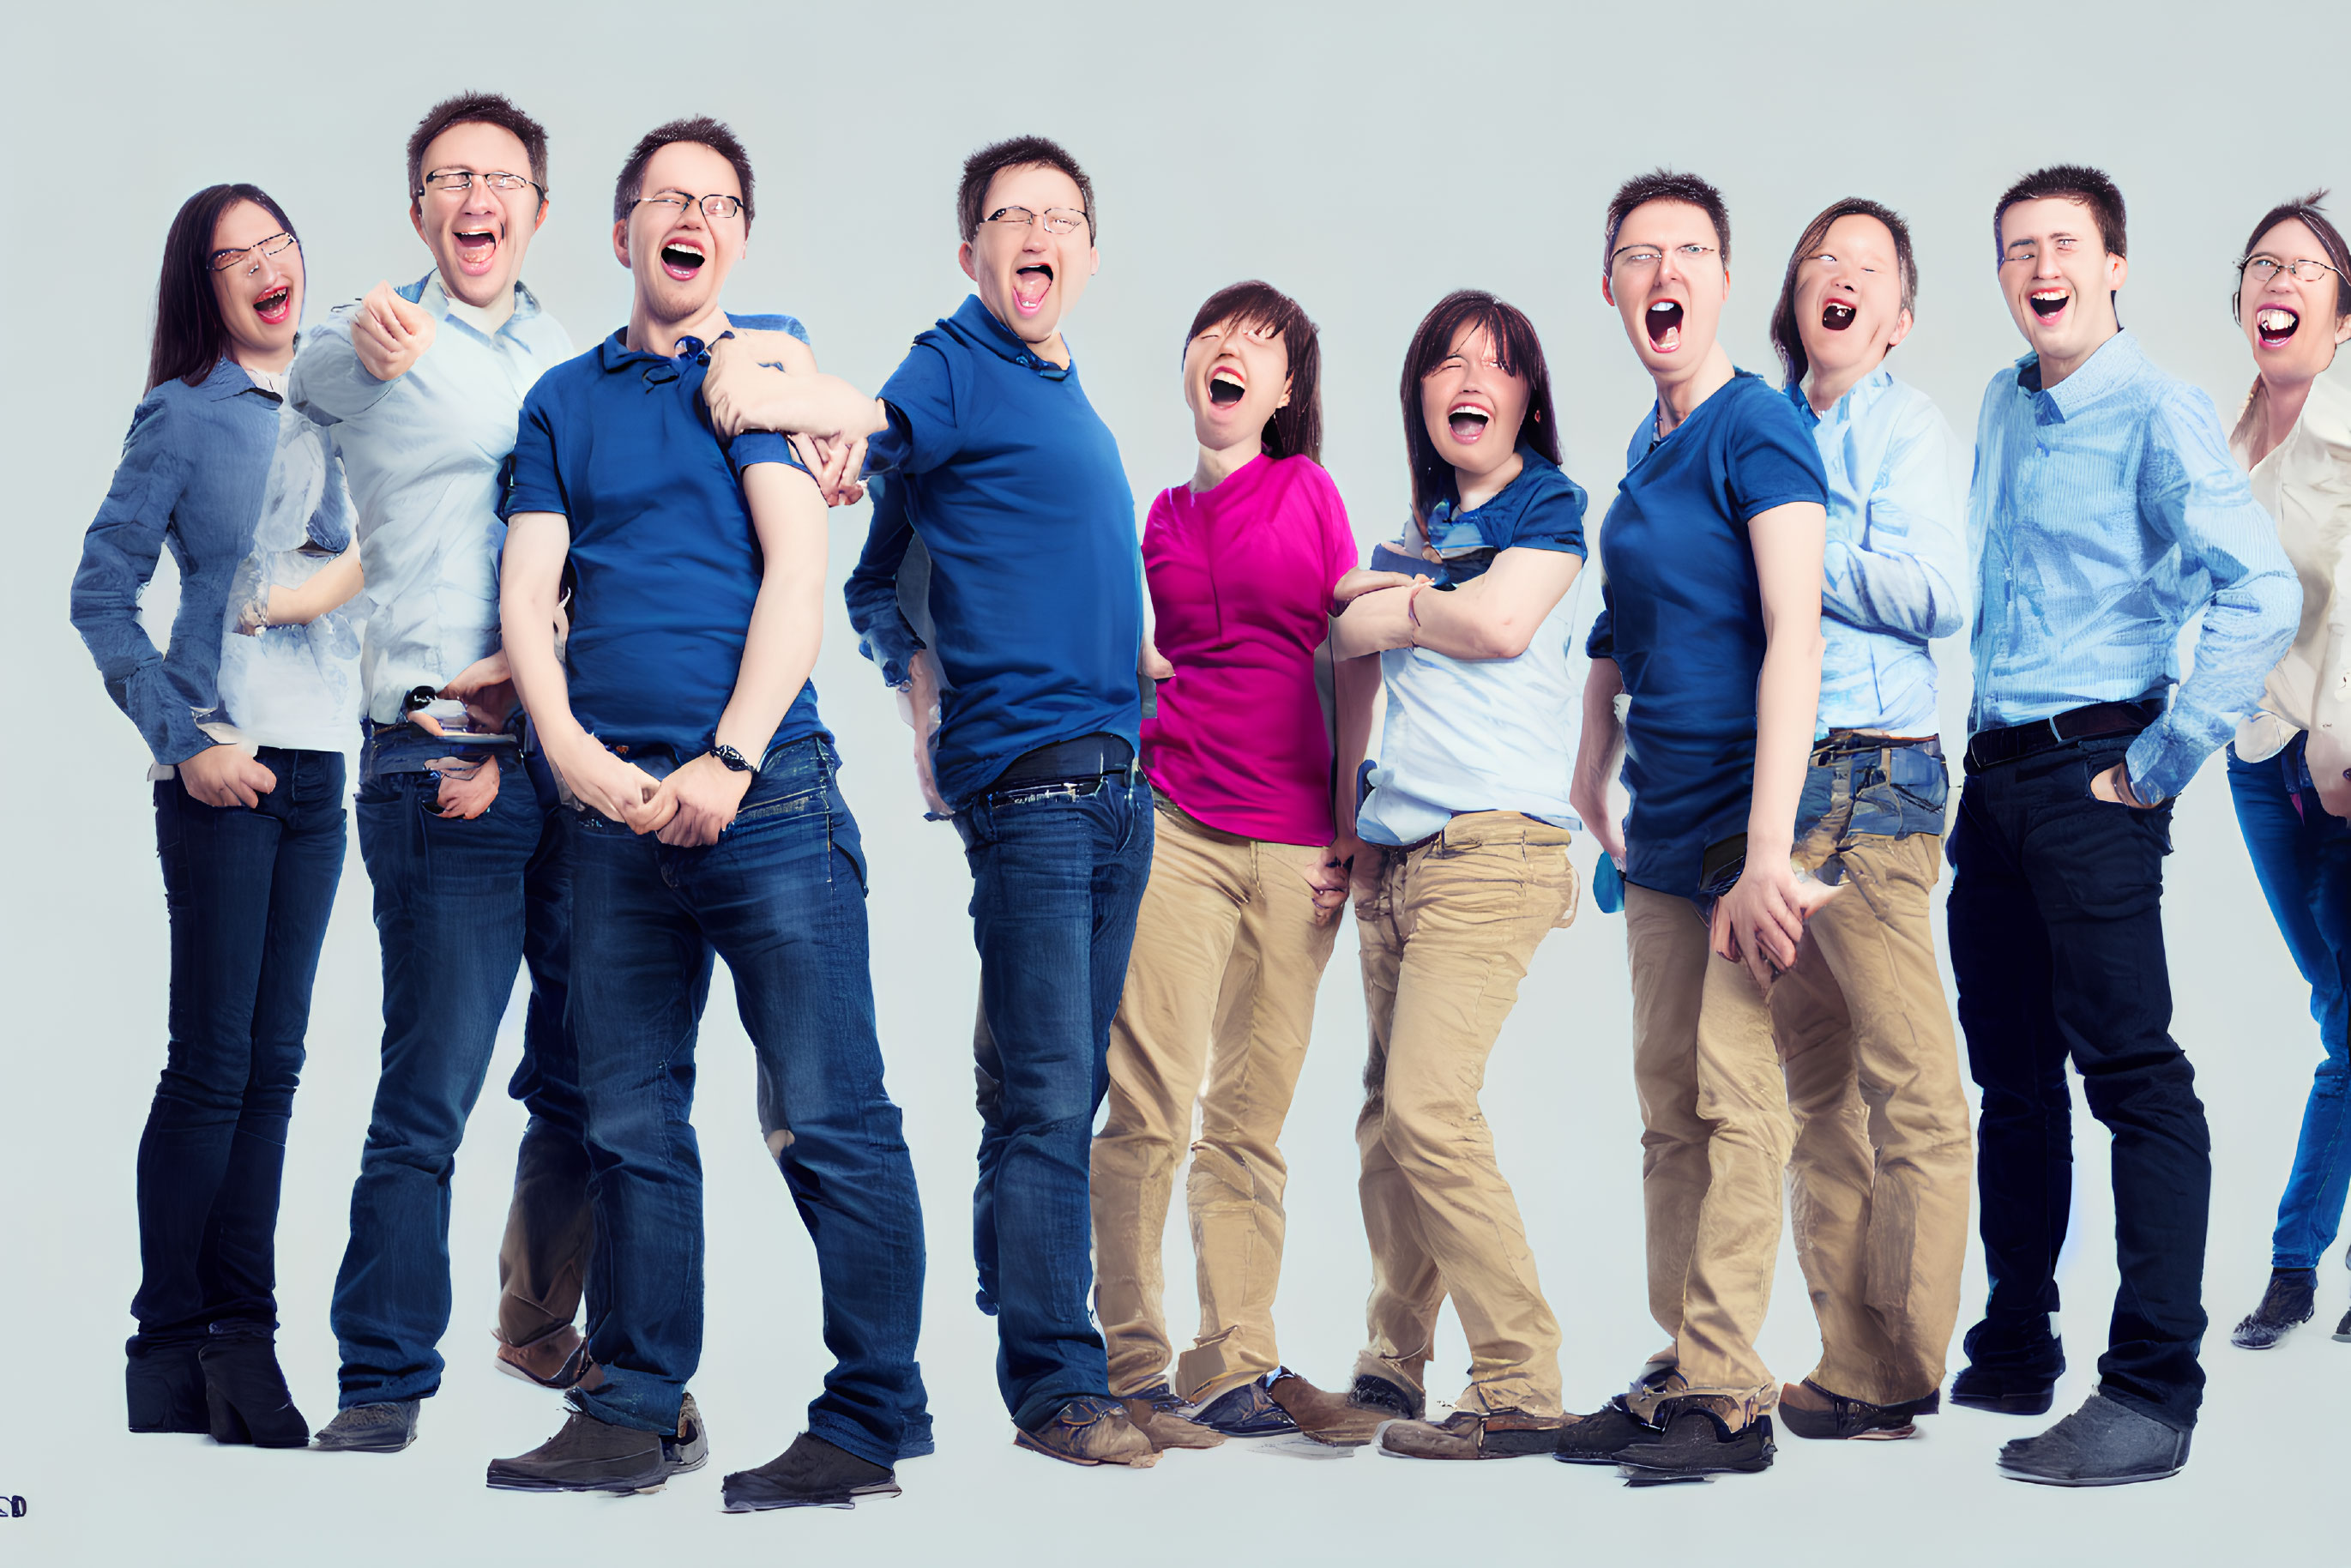 Group of people in casual attire laughing against light blue background